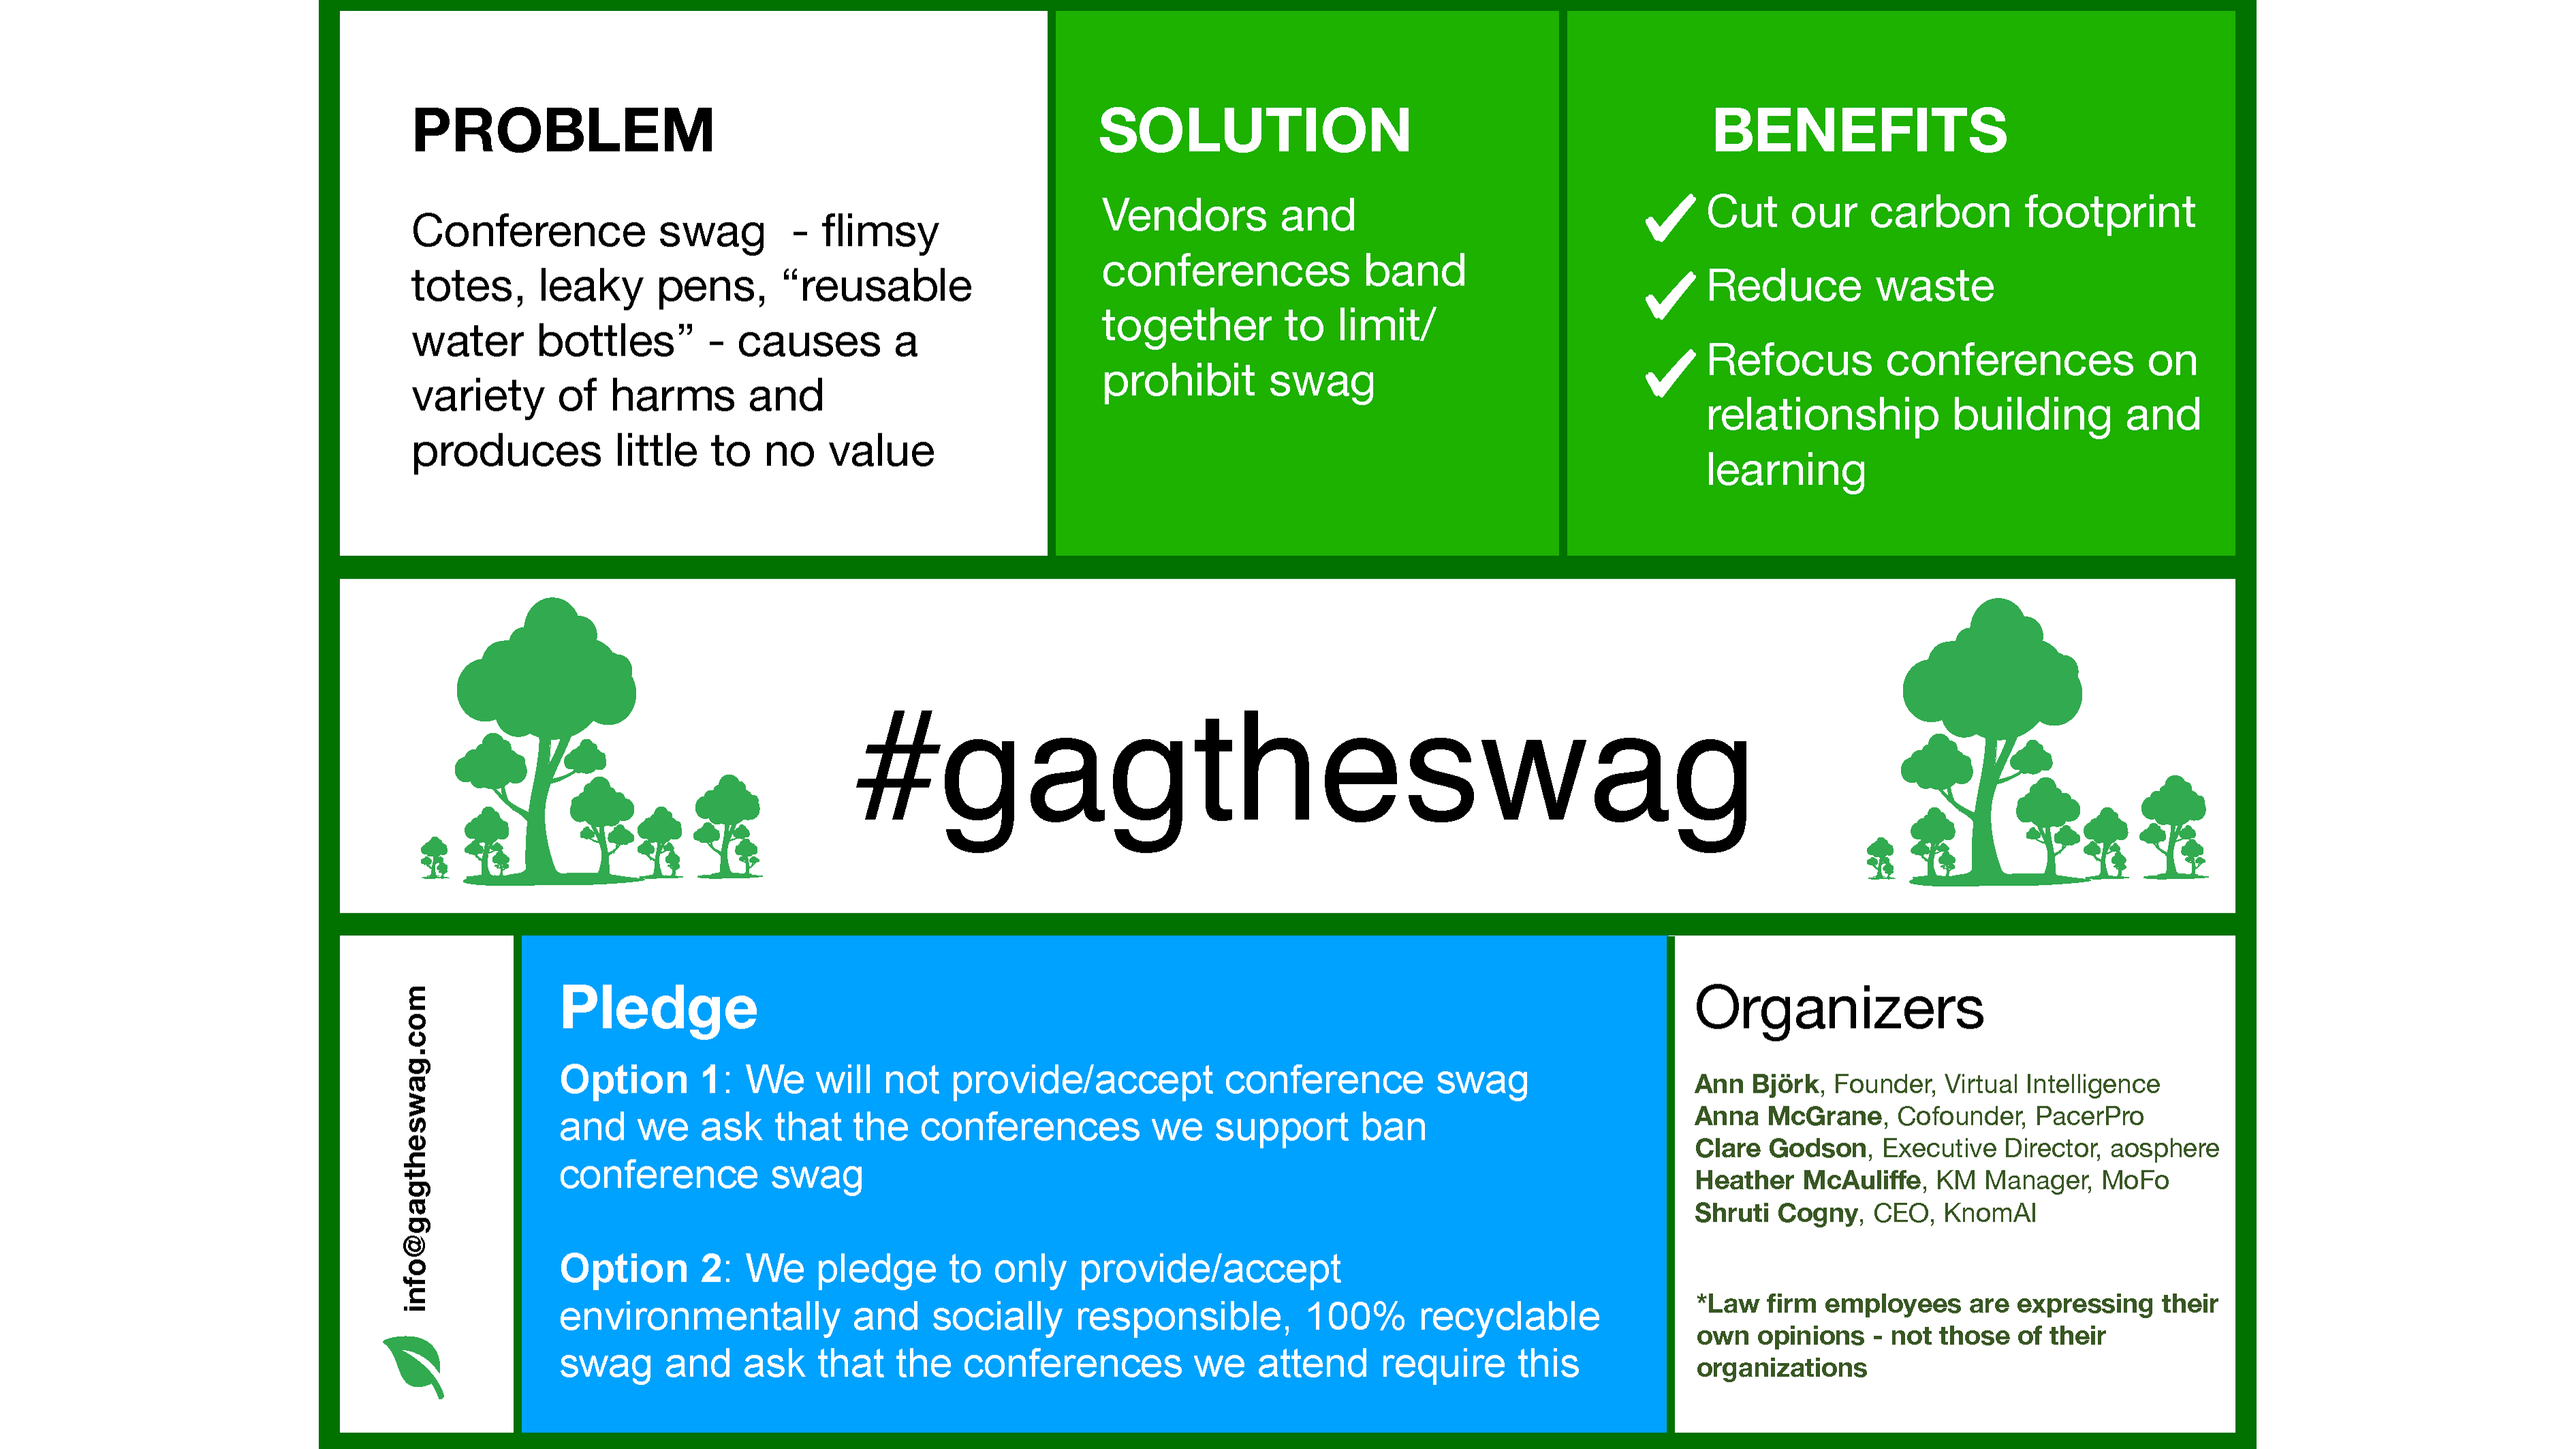 Another Side to the #gagtheswag Campaign